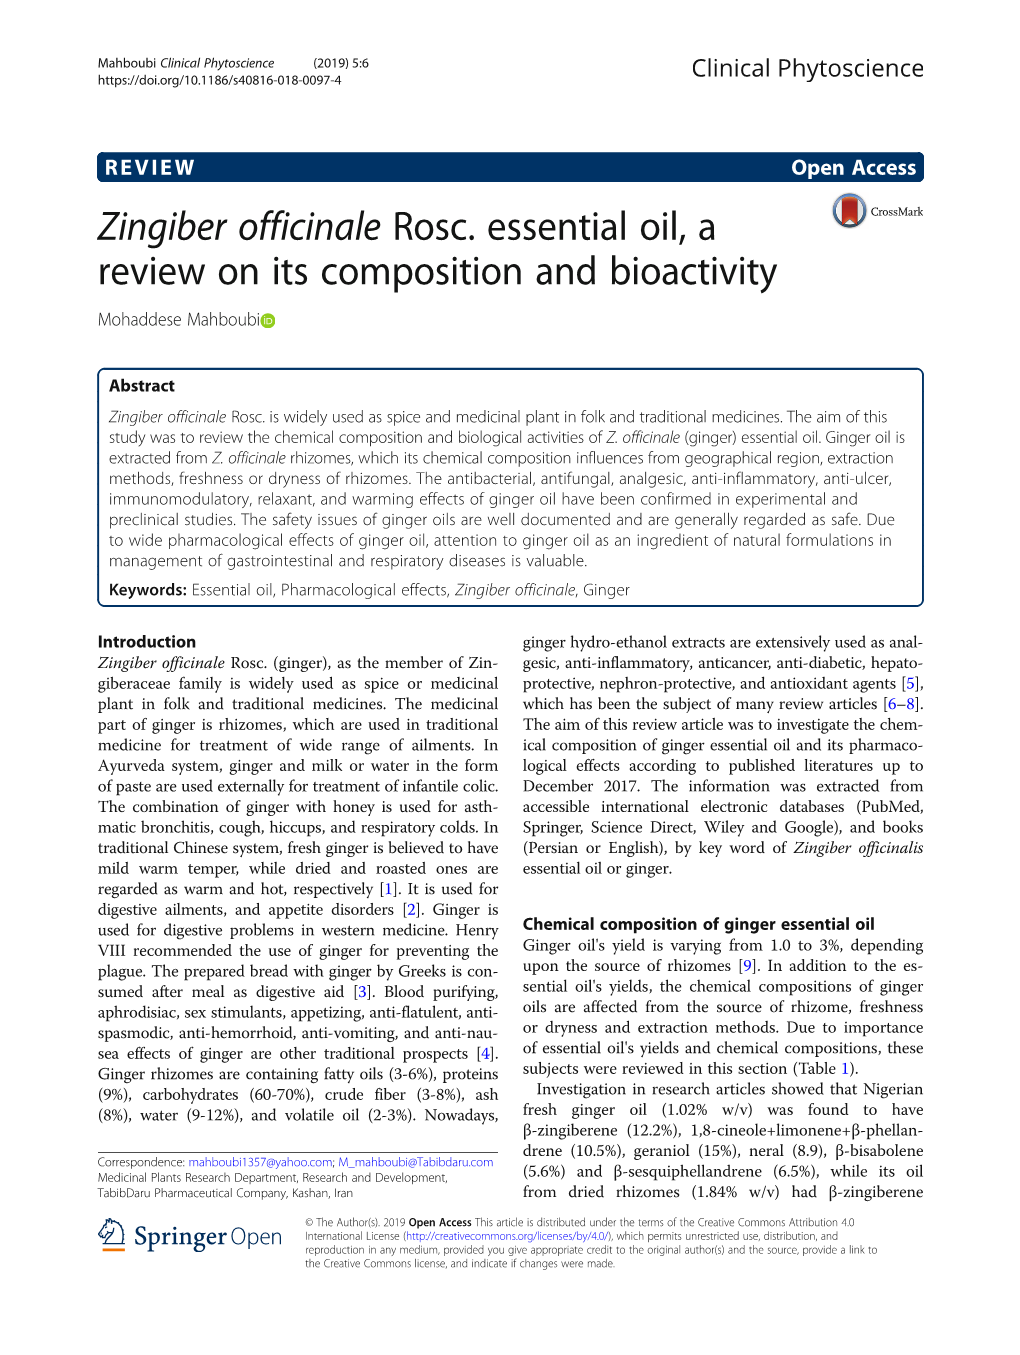 Zingiber Officinale Rosc. Essential Oil, a Review on Its Composition and Bioactivity Mohaddese Mahboubi